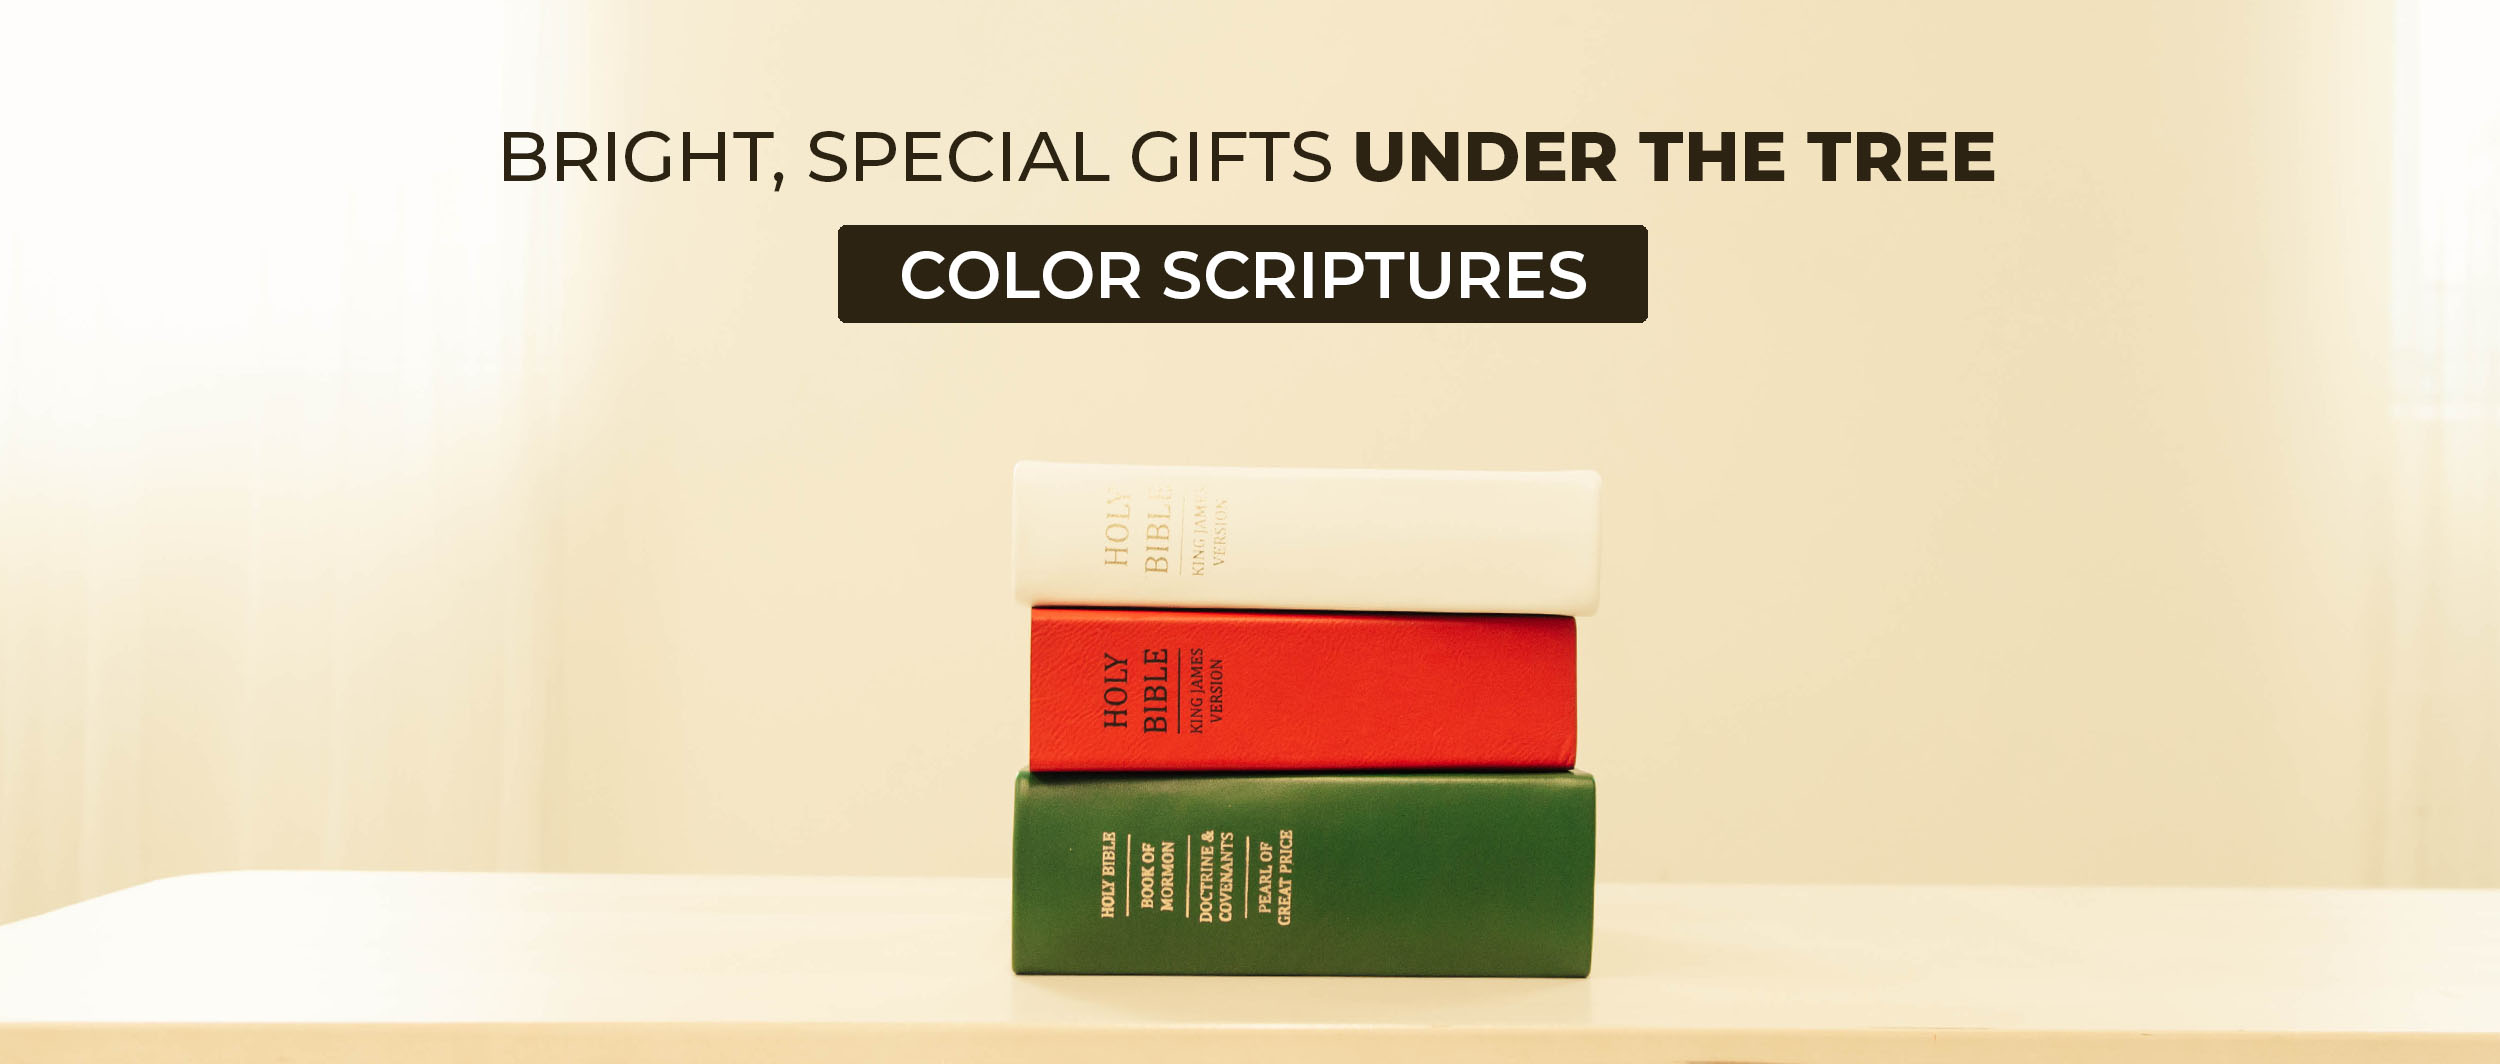 LDS Color Scriptures in 40+ Colors